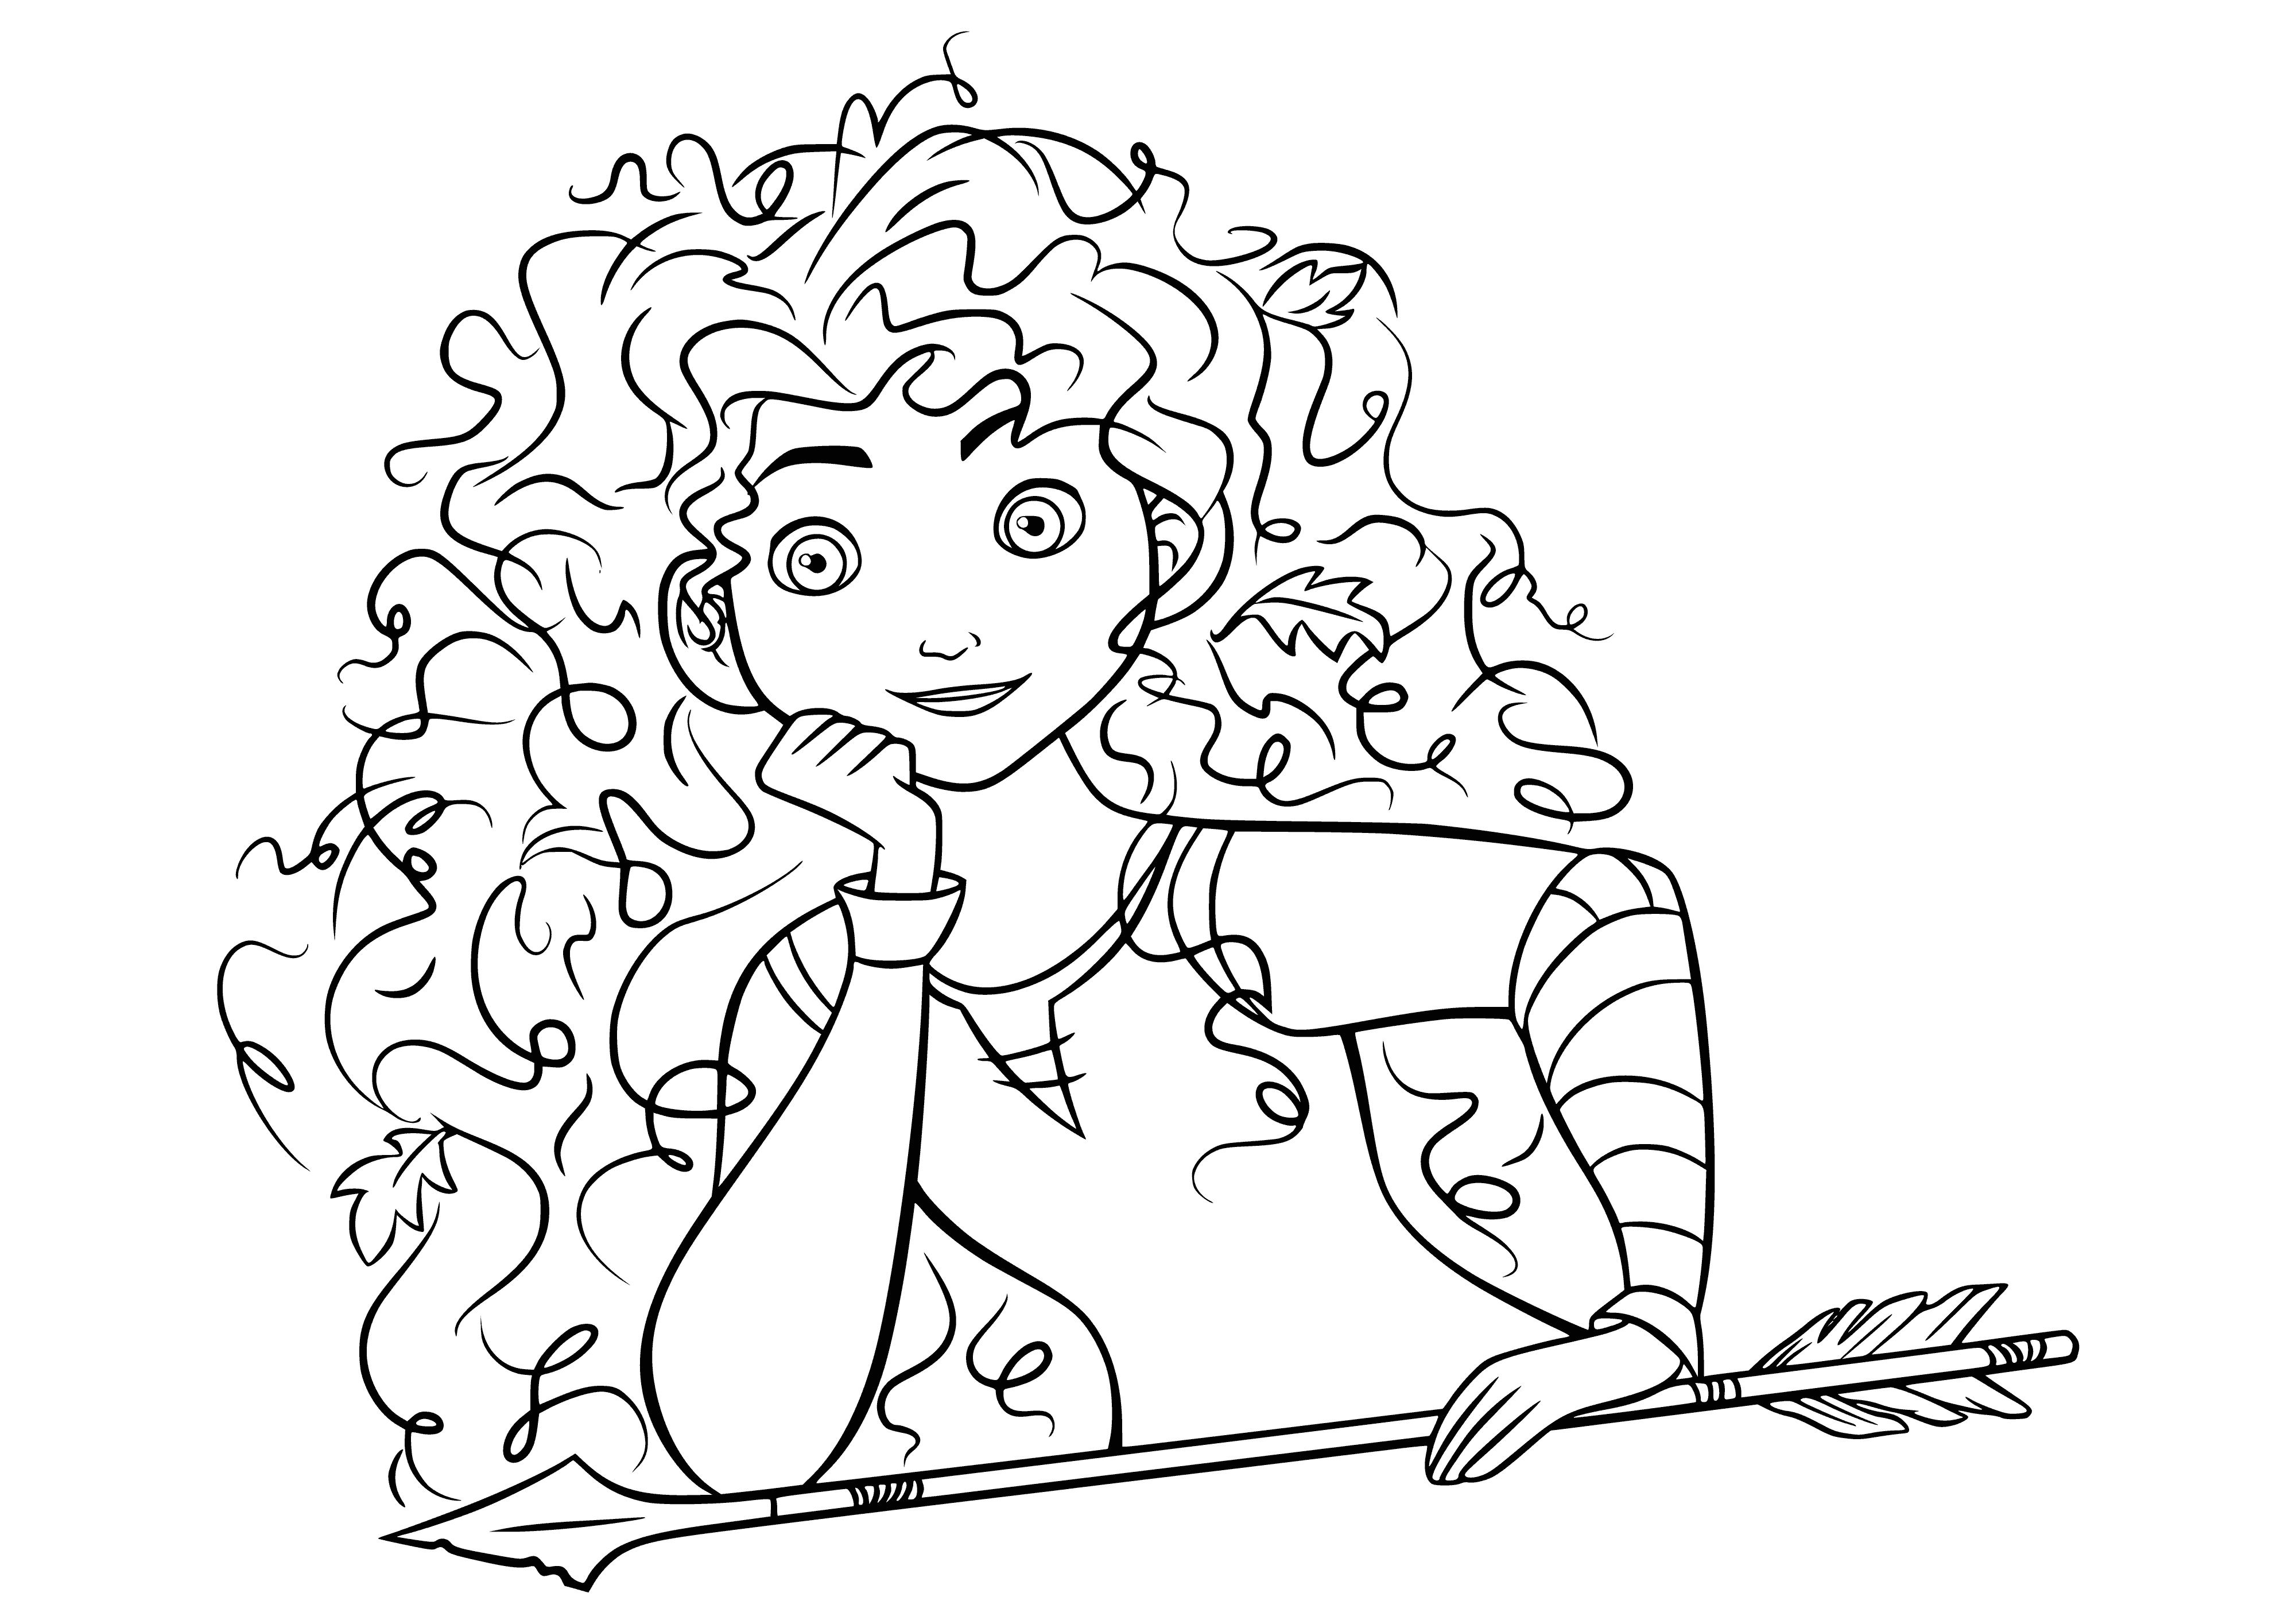 coloring page: Brave Merida in blue dress, holds an arrow with bow in hand, standing in a wooded forest. #DisneyPrincess